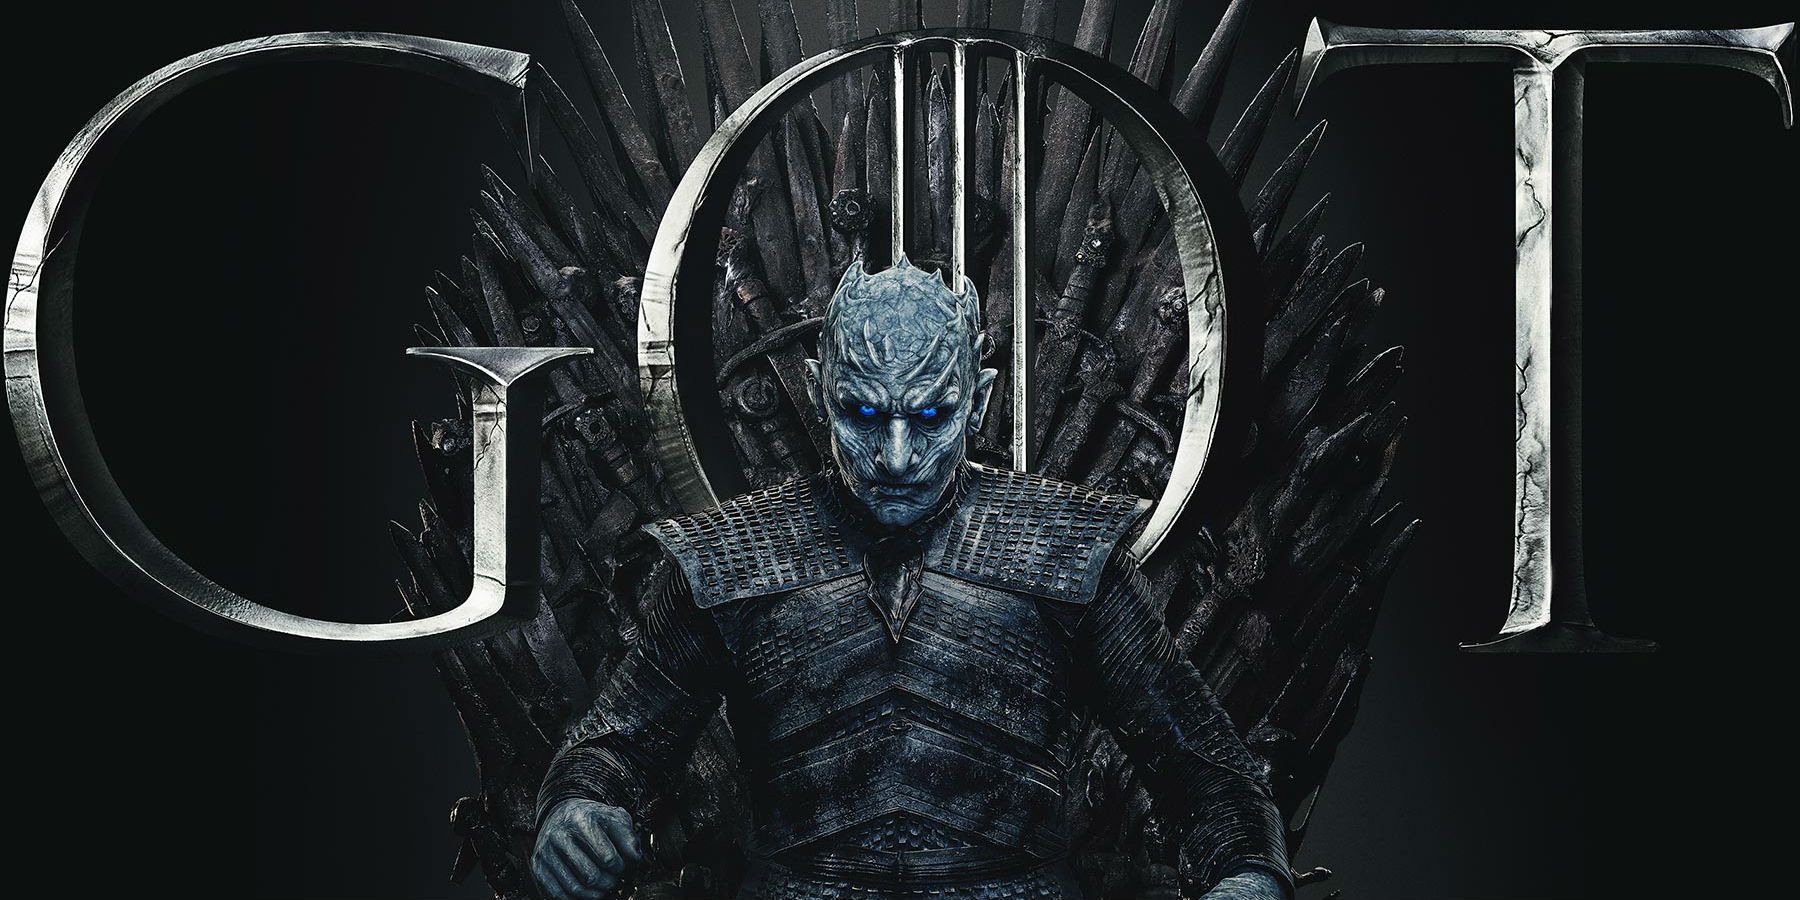 Game of Thrones - Night King on the iron Throne